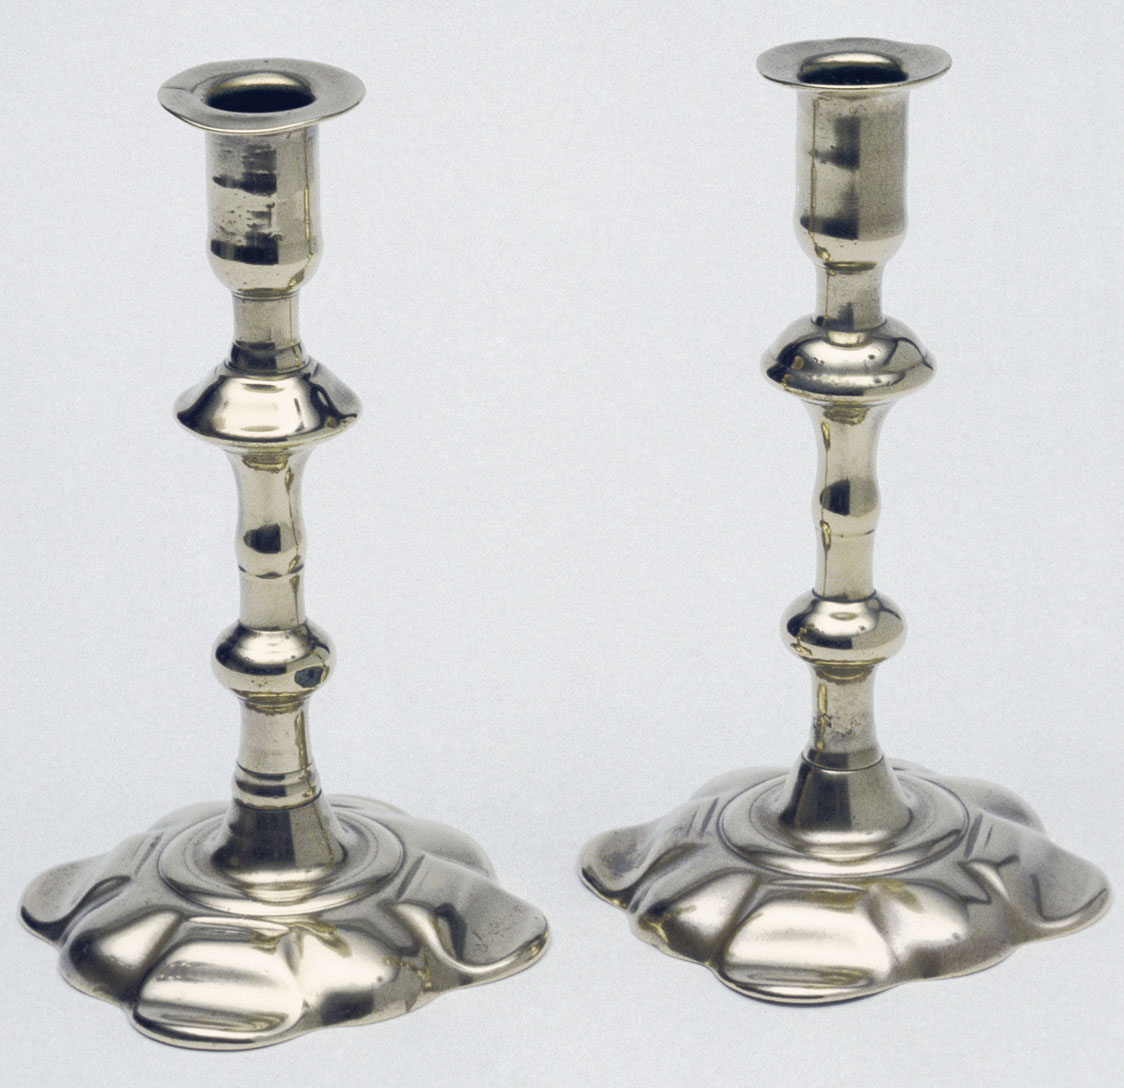 1993.0022.001, 1993.0022.002 Candlestick, view 1